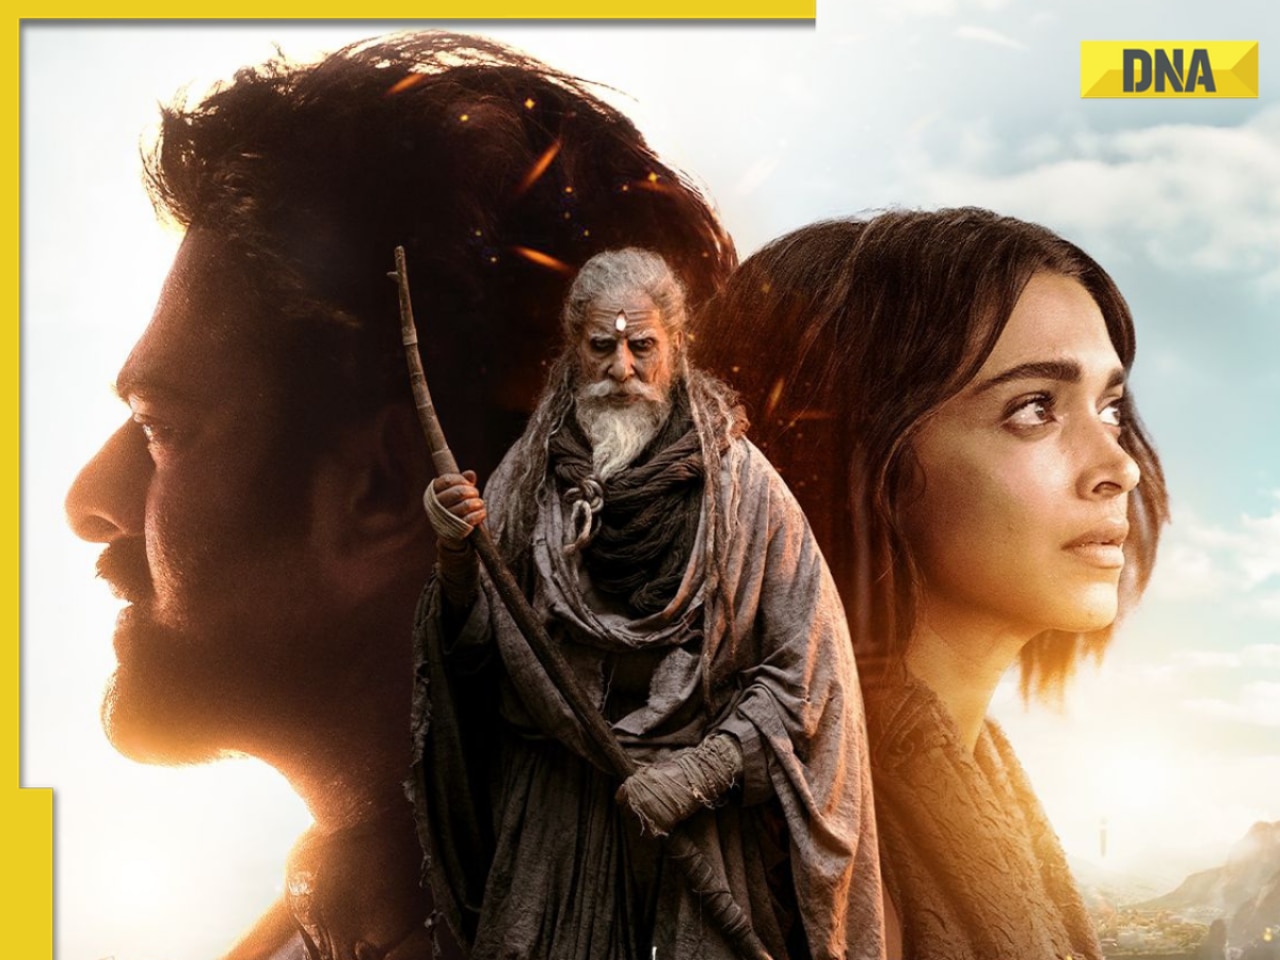 Kalki 2898 AD review: Amitabh's angry old man towers over Prabhas in brave but dragged-out marriage of mythology, sci-fi